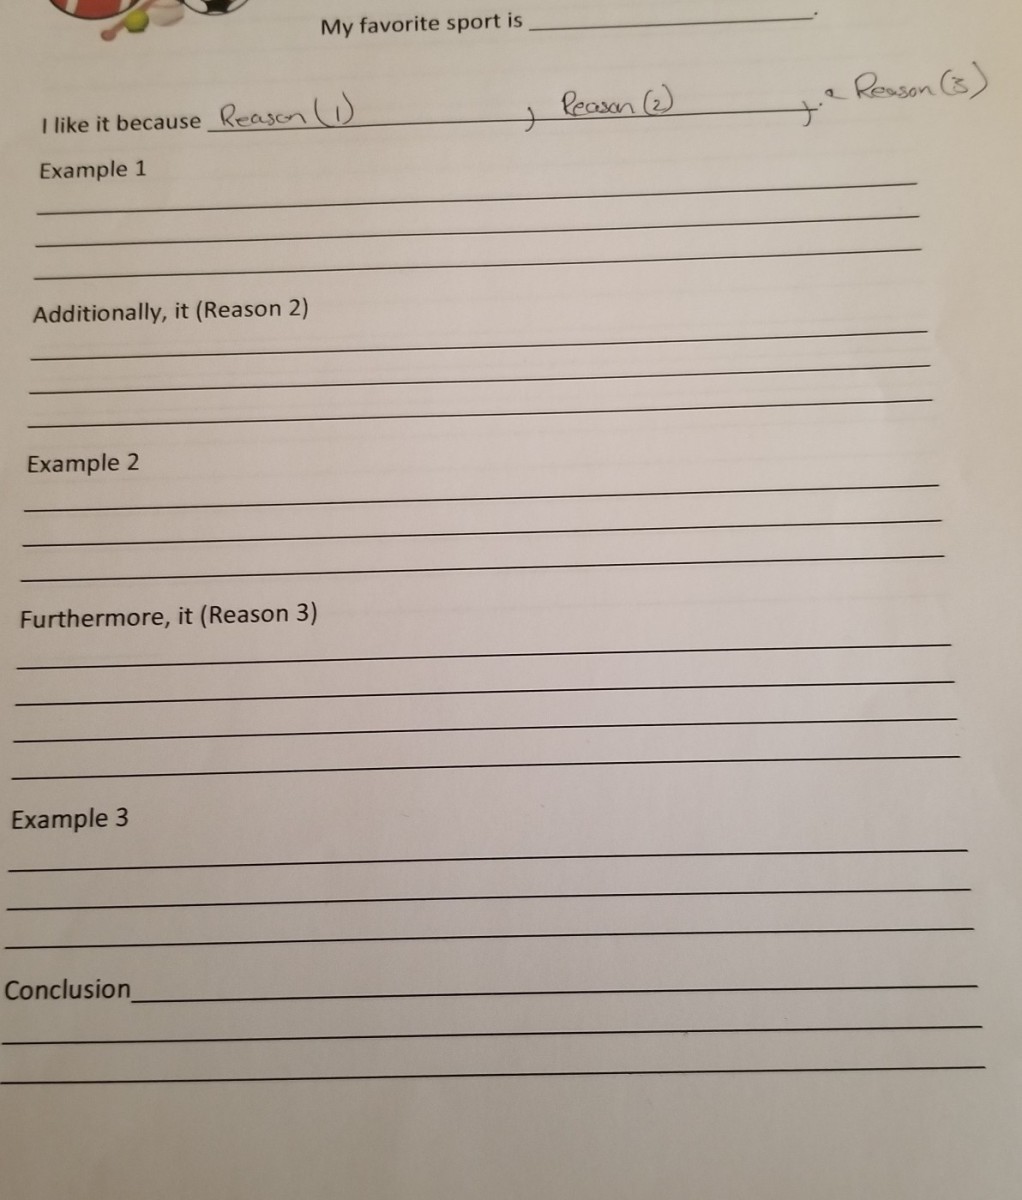 Teaching Your Third Grader to Write an Opinion Essay